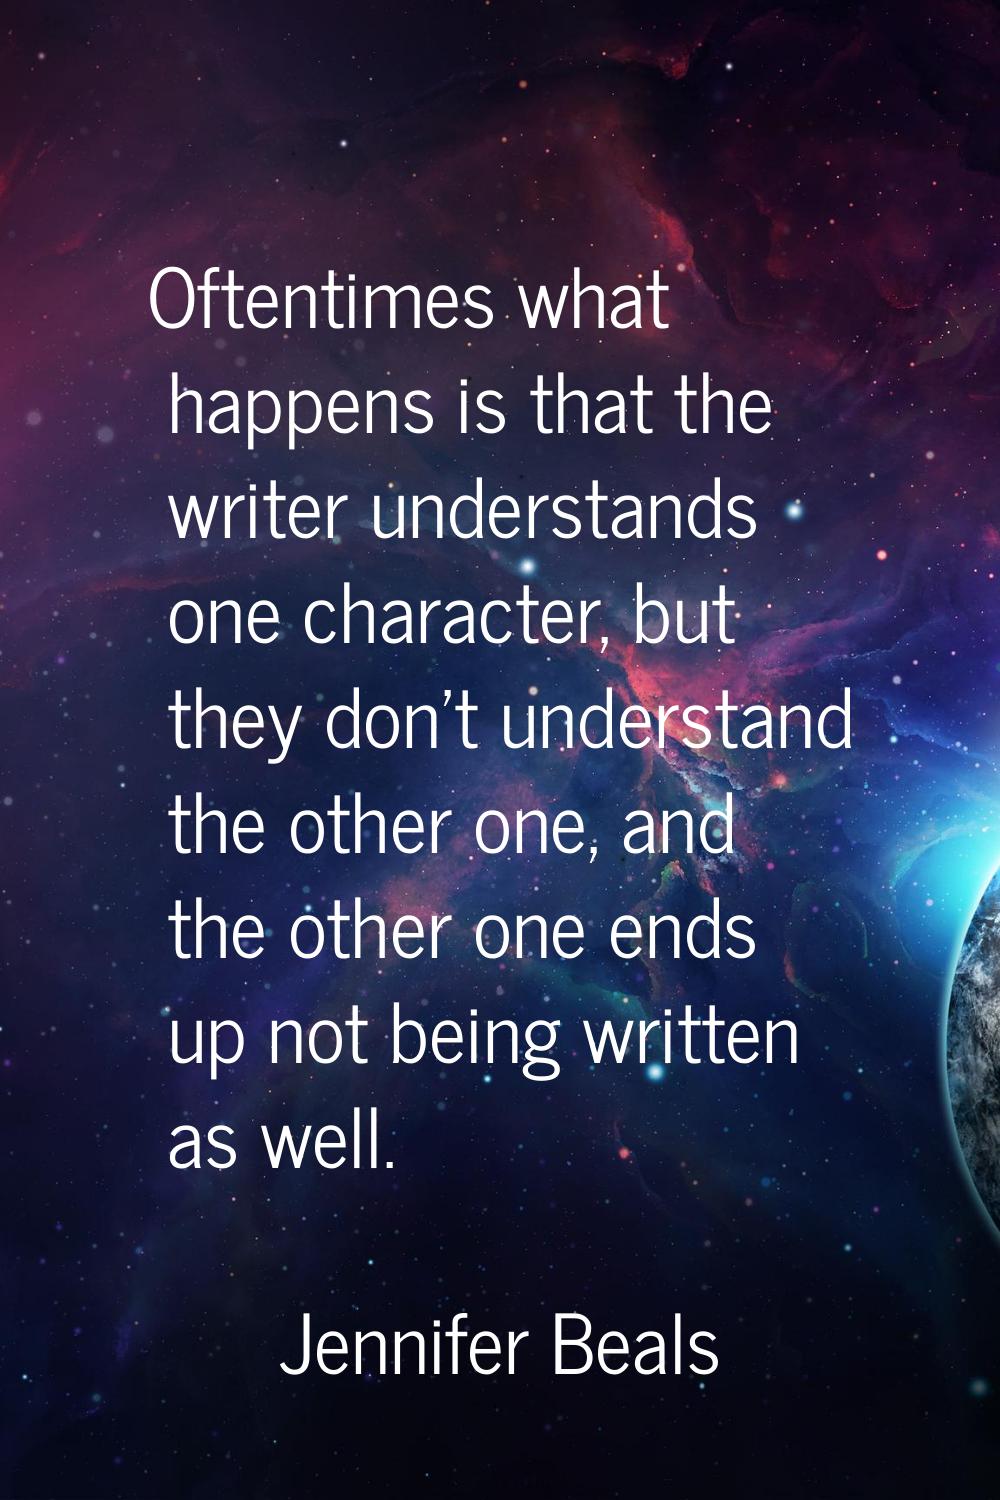 Oftentimes what happens is that the writer understands one character, but they don't understand the